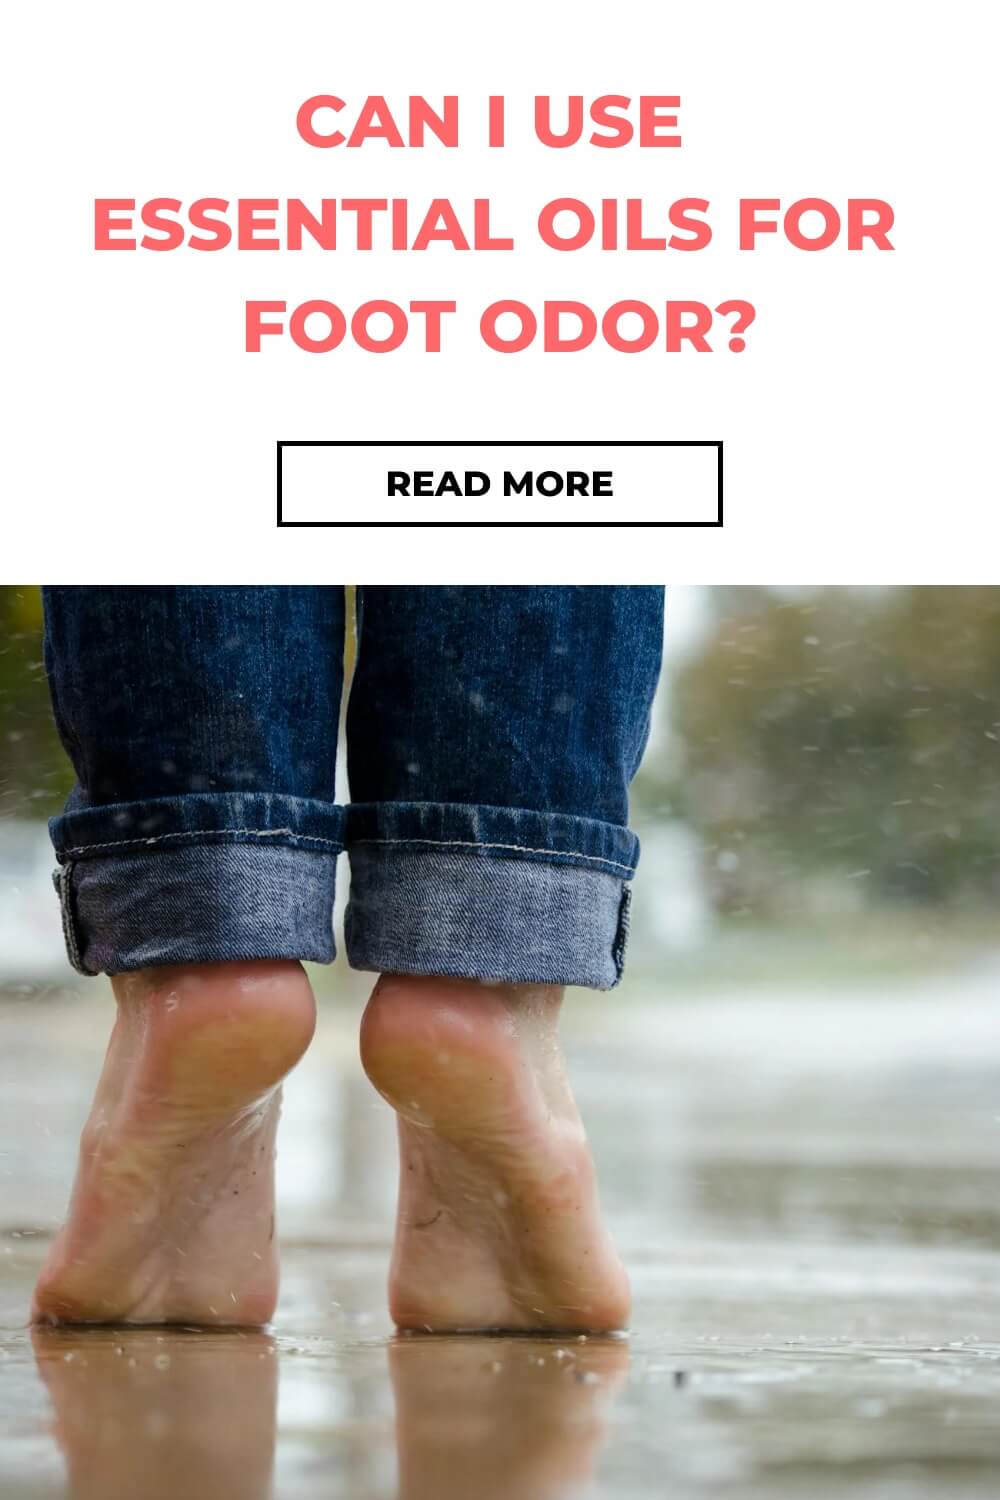 Using Essential Oils to Eliminate Foot Odor by Loving Essential Oils